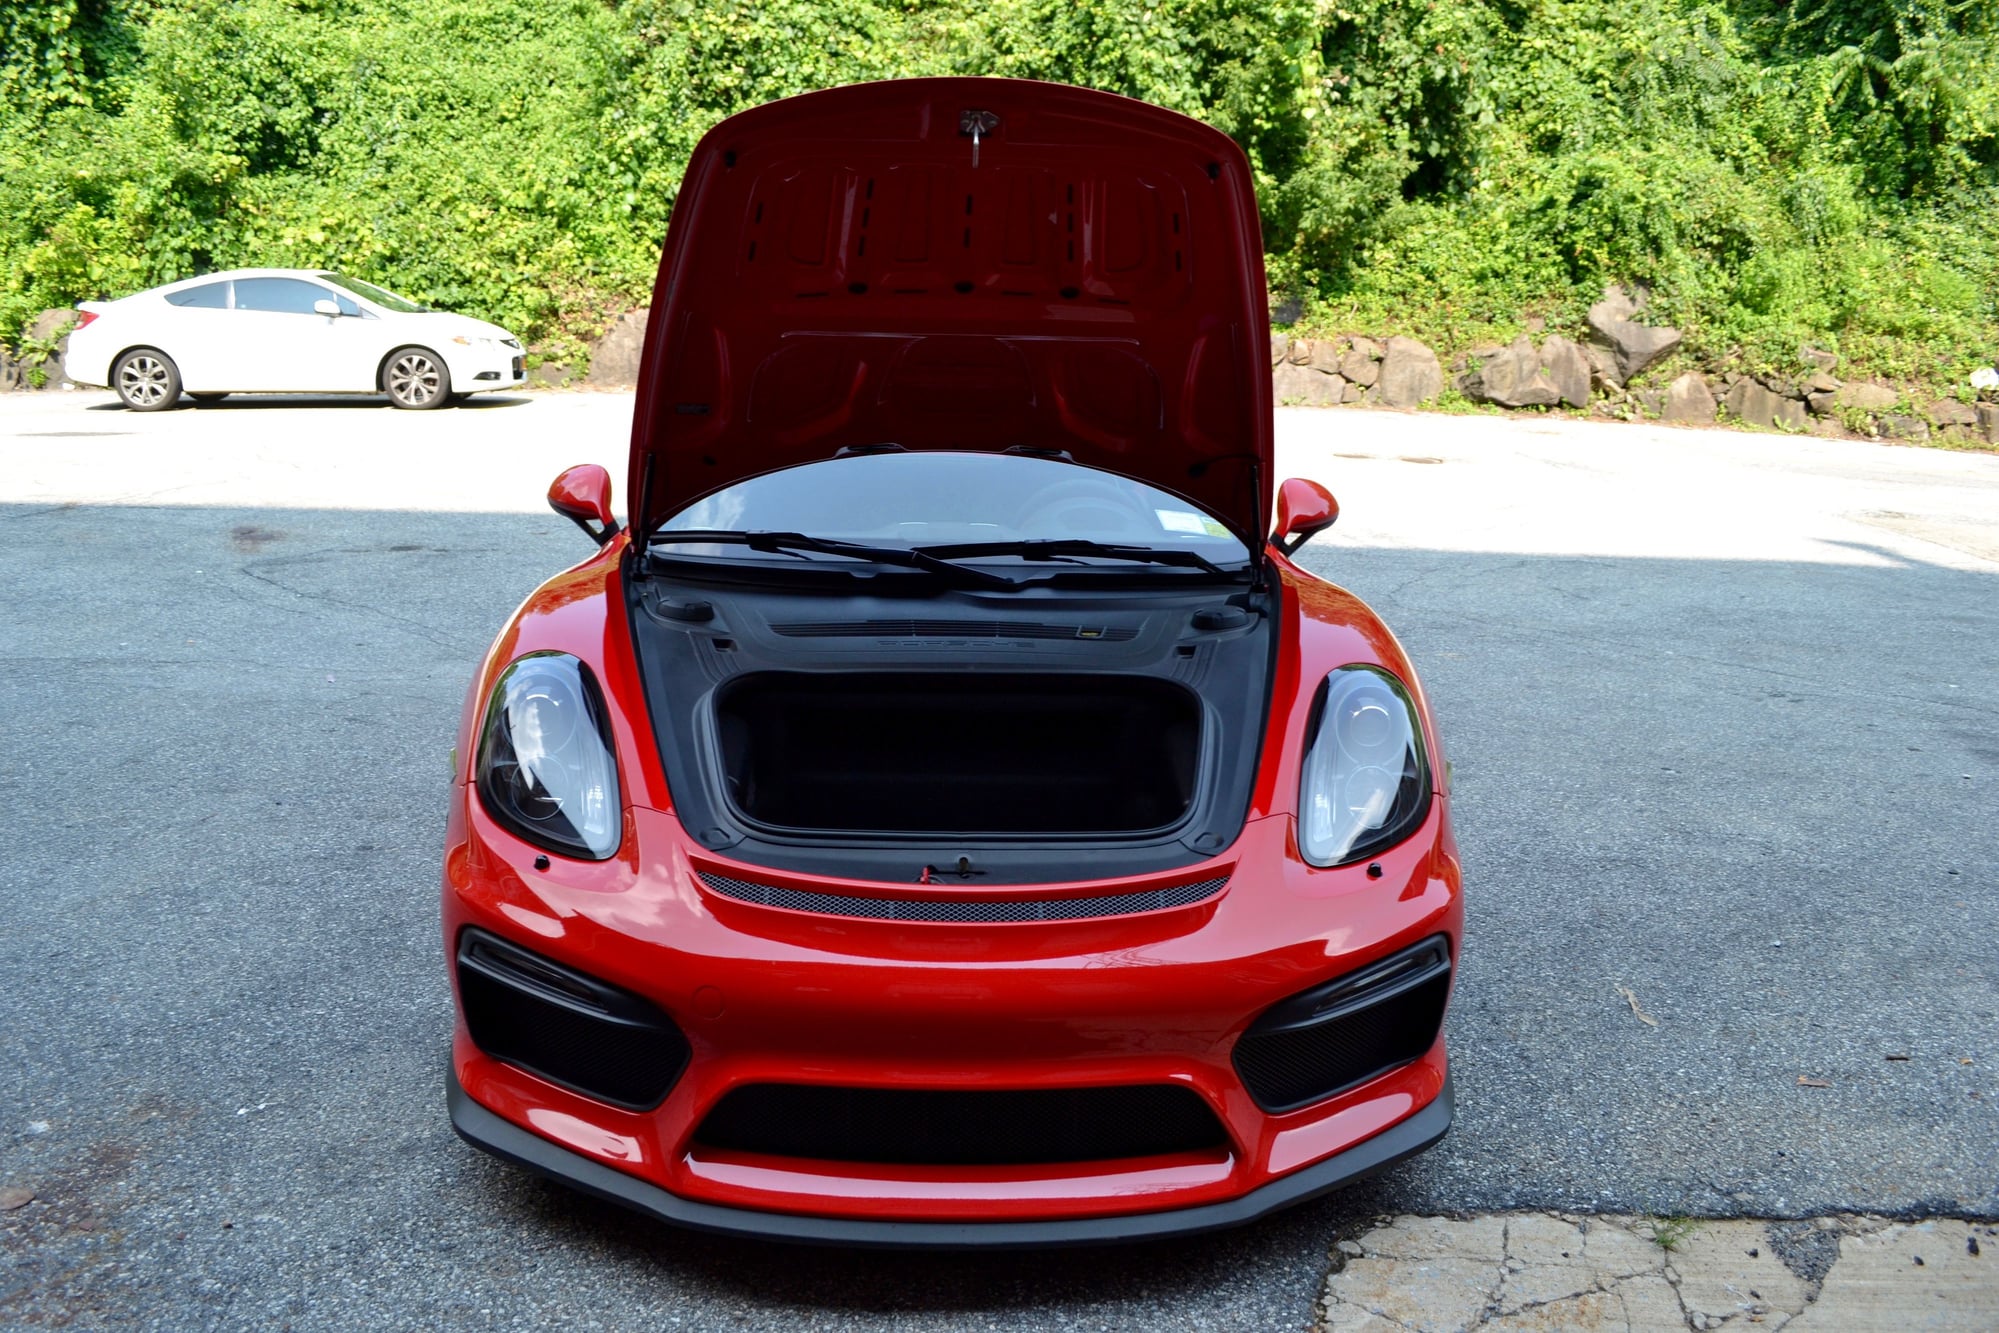 2016 Porsche Cayman GT4 - Guards Red Porsche Cayman GT4 (Light Weight Buckets, Perfect DME, Not tracked) - Used - VIN WP0AC2A89GK191119 - 11,960 Miles - 6 cyl - 2WD - Manual - Coupe - Red - New Rochelle, NY 10801, United States